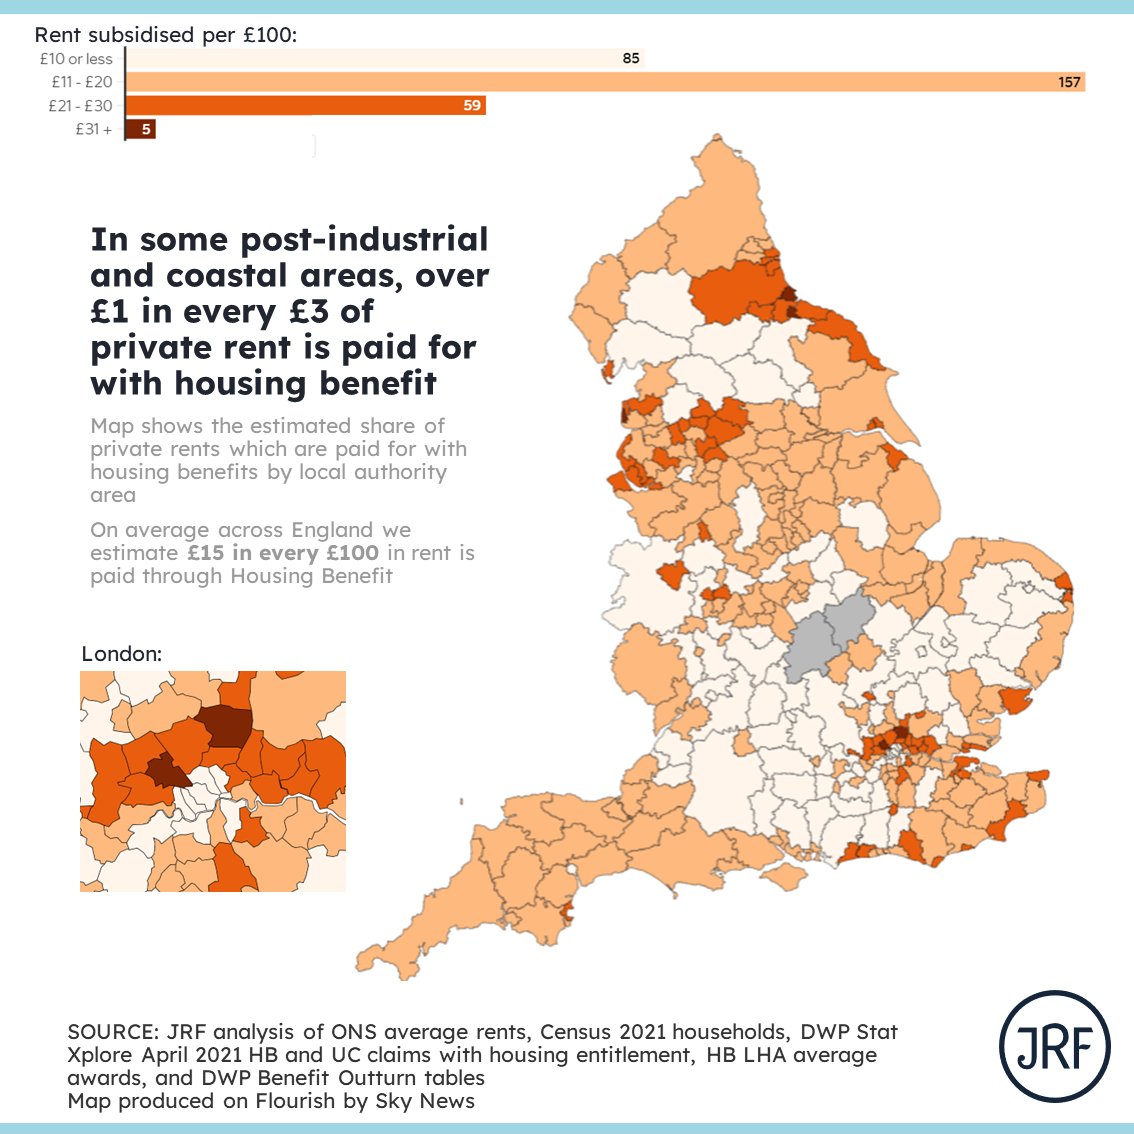 Across England we're handing £9bn a year in housing benefit to private landlords. In some areas, including some seaside and post-industrial cities and towns, but also Enfield and Brent, over £1 in every £3 of rent paid is paid through HB. So what's going on??